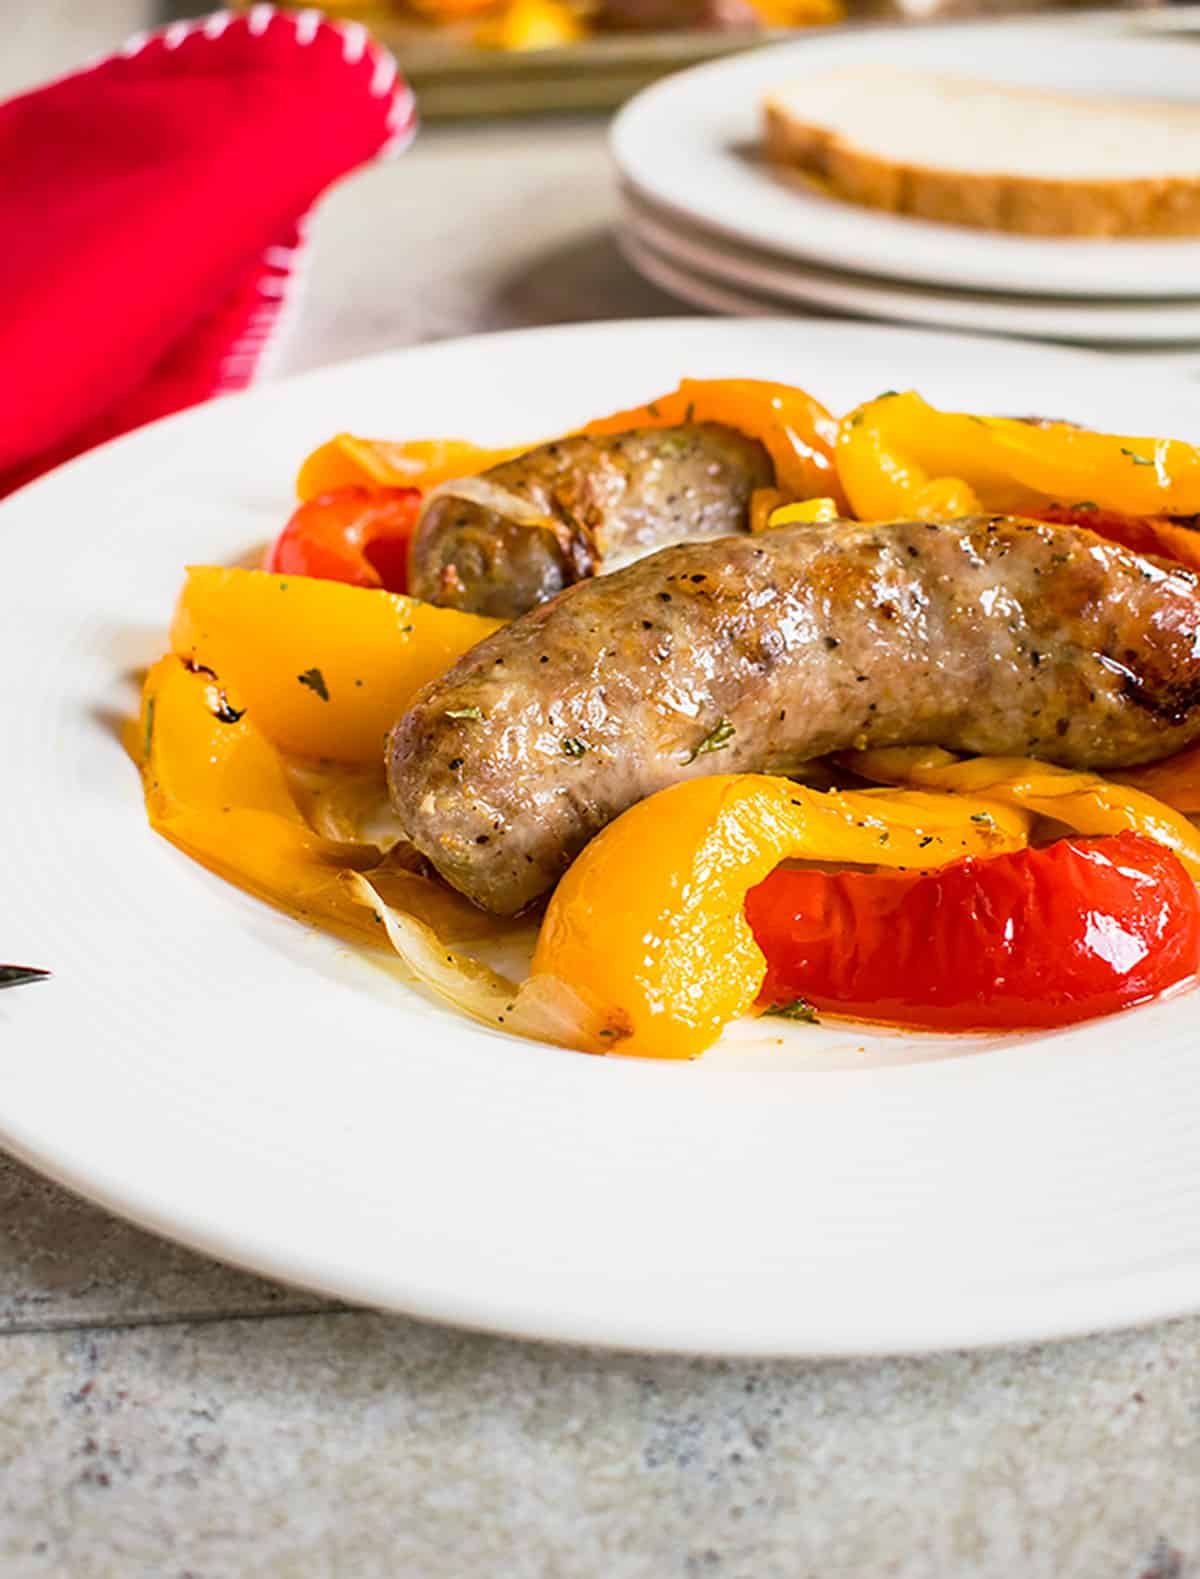 sausage, yellow and red peppers on white plate, red napkin, bread in background